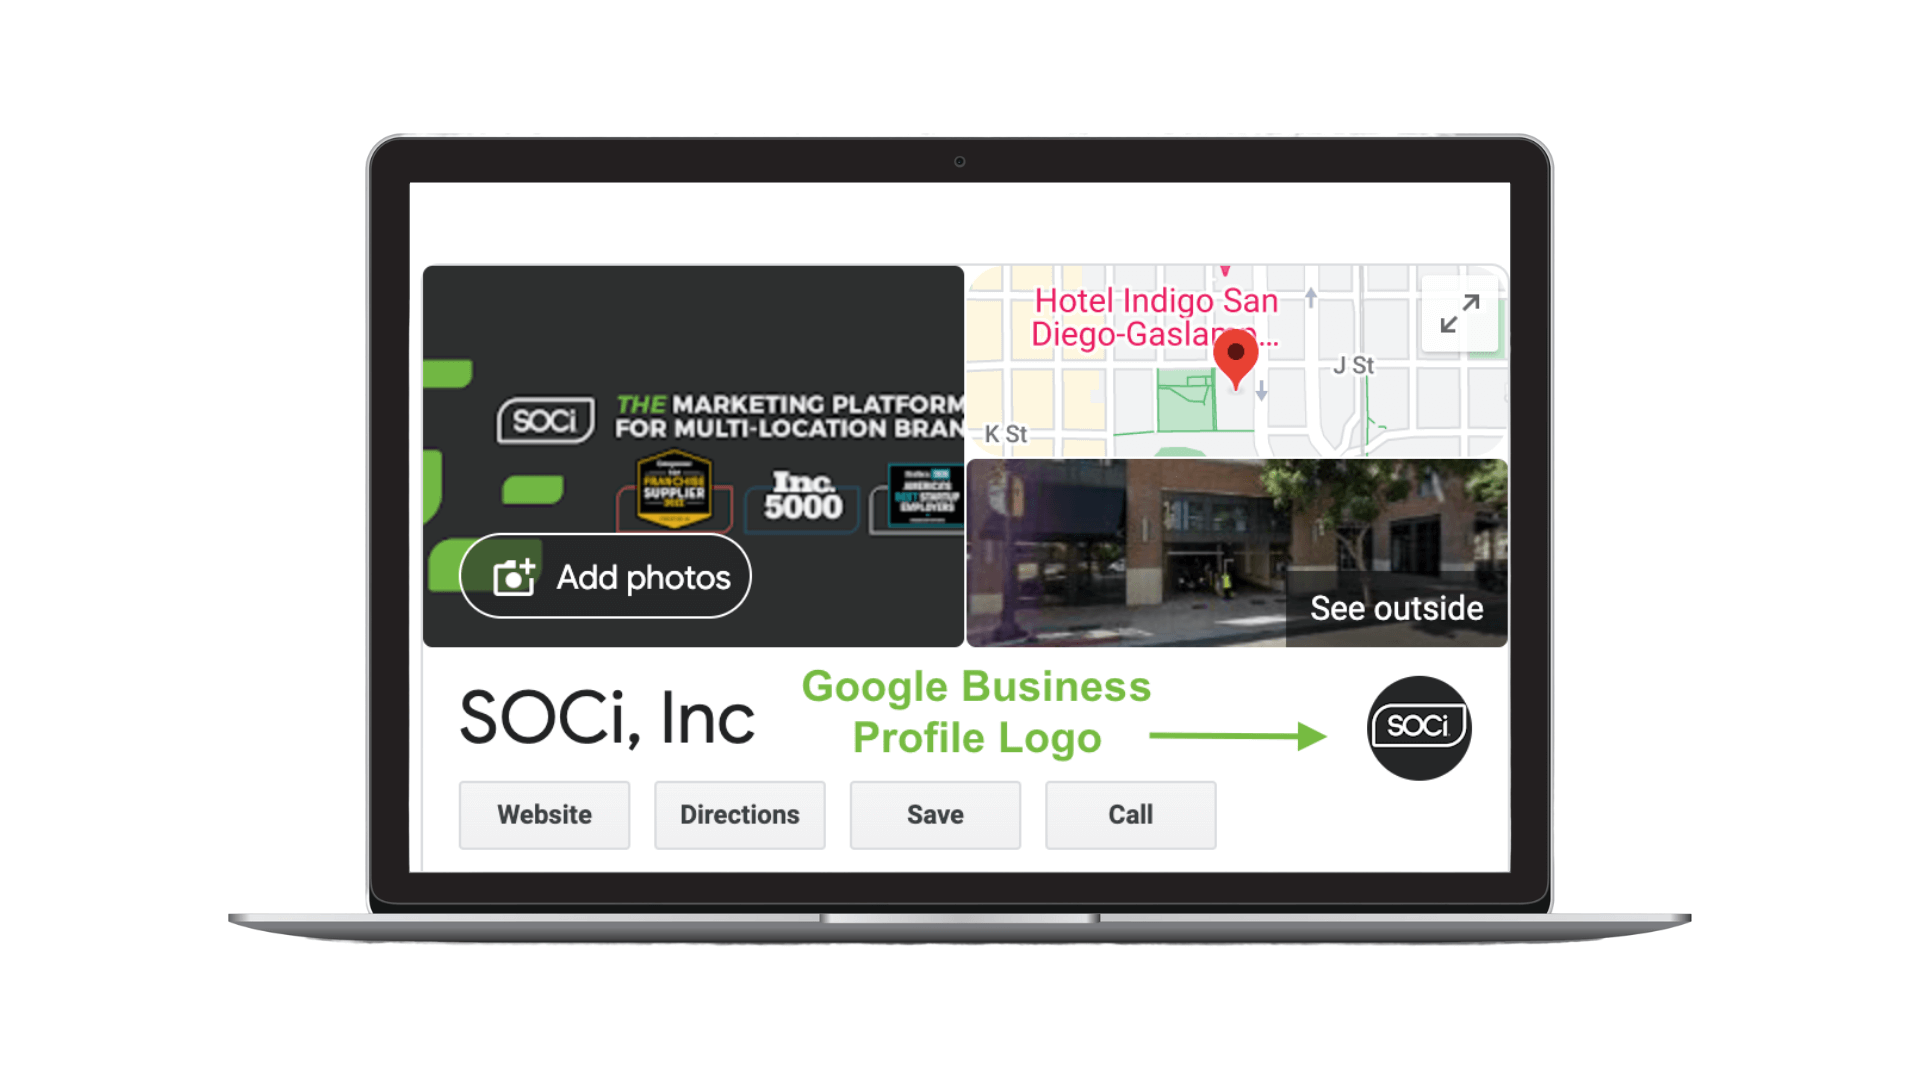 Image of SOCi’s Google Business Profile with a green box, text, and arrow highlighting the GBP Logo